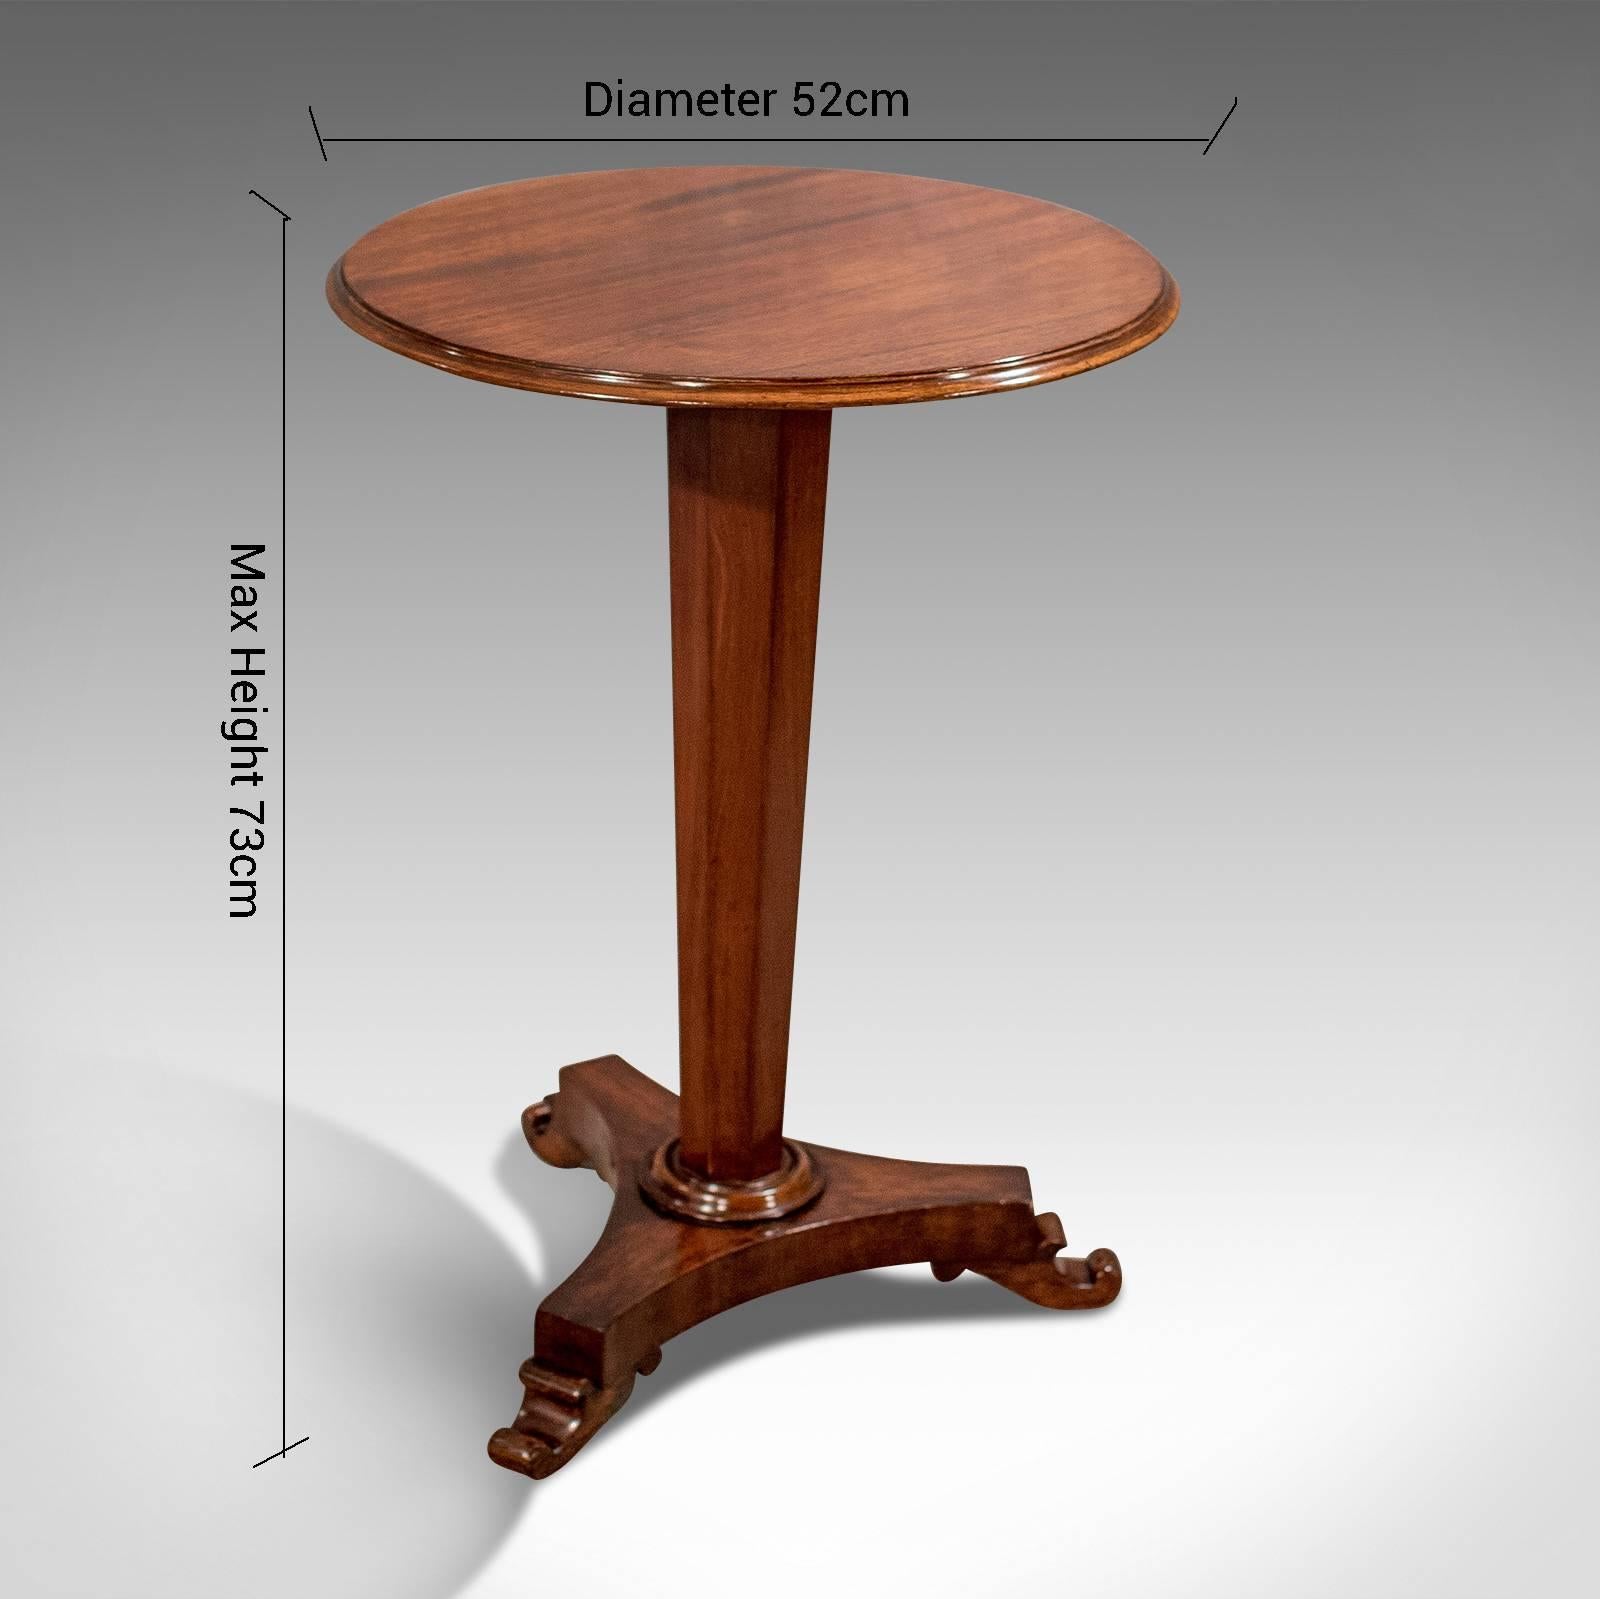 A most pleasing tripod wine table presented in very good antique condition
Classic Regency period 
Delightfully crafted in quality mahogany
Rising from a trefoil base upon carved scroll toe feet
Desirable, elegant, tapering, octagonal stem